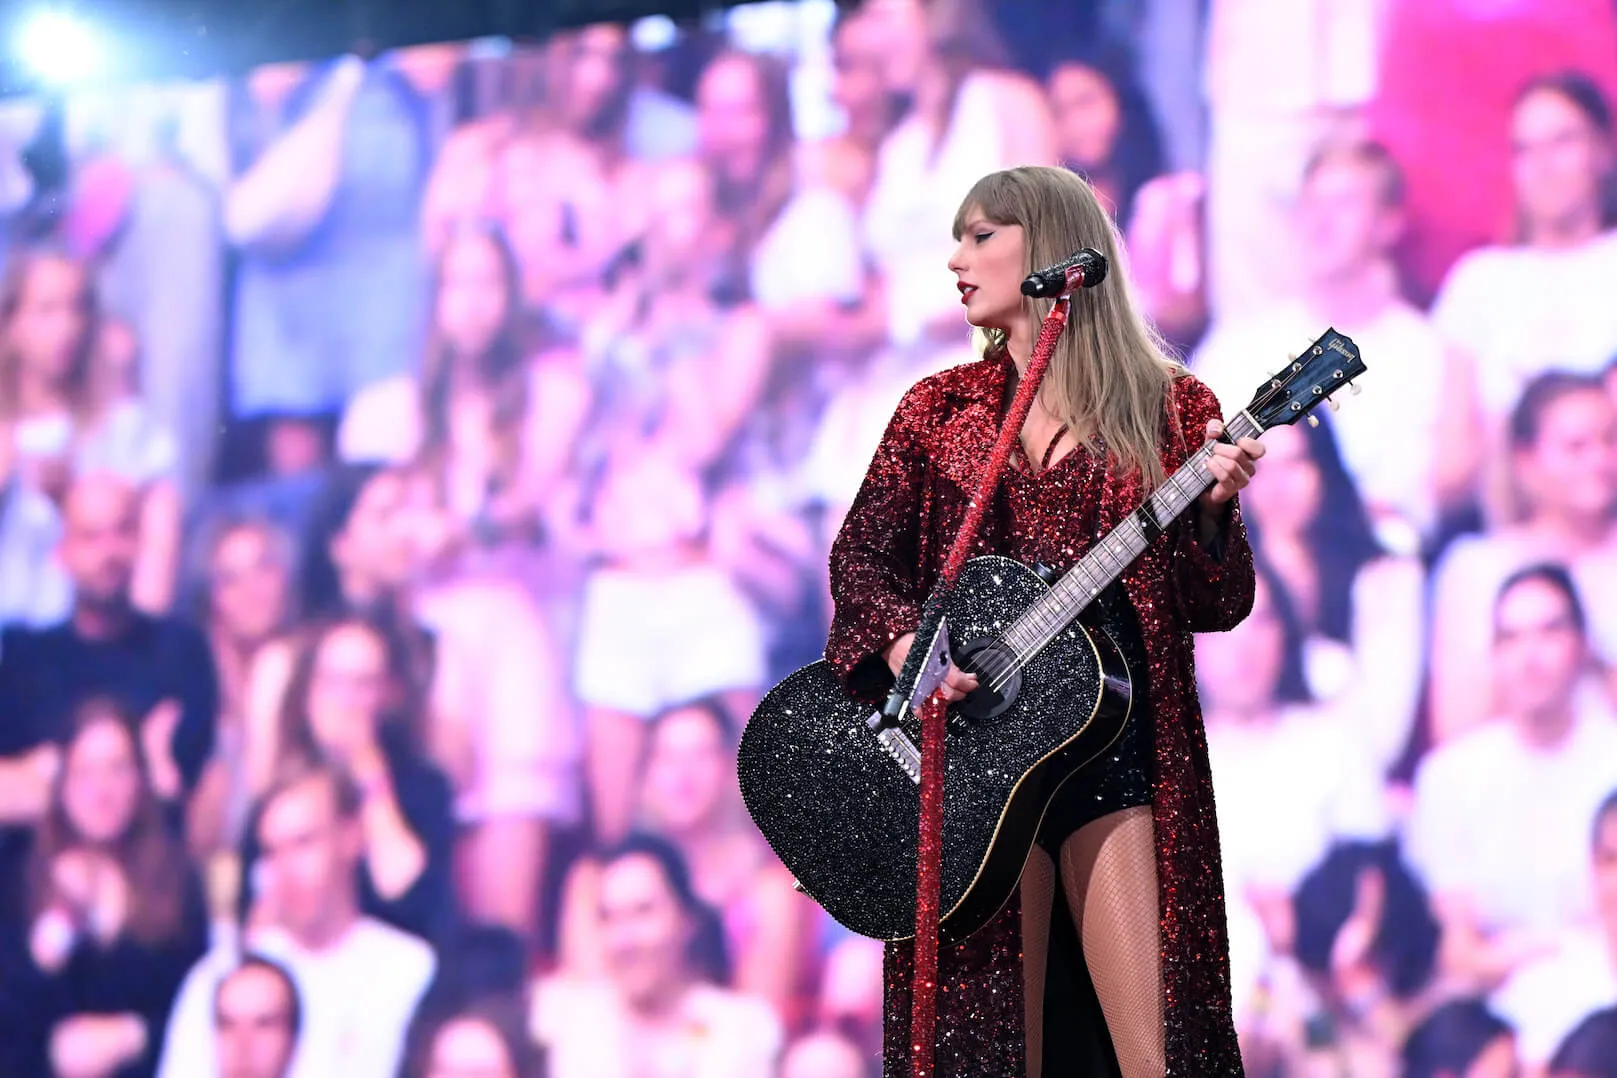 Taylor Swift holding a guitar on stage during 'The Eras Tour' against a background of people in Amsterdam